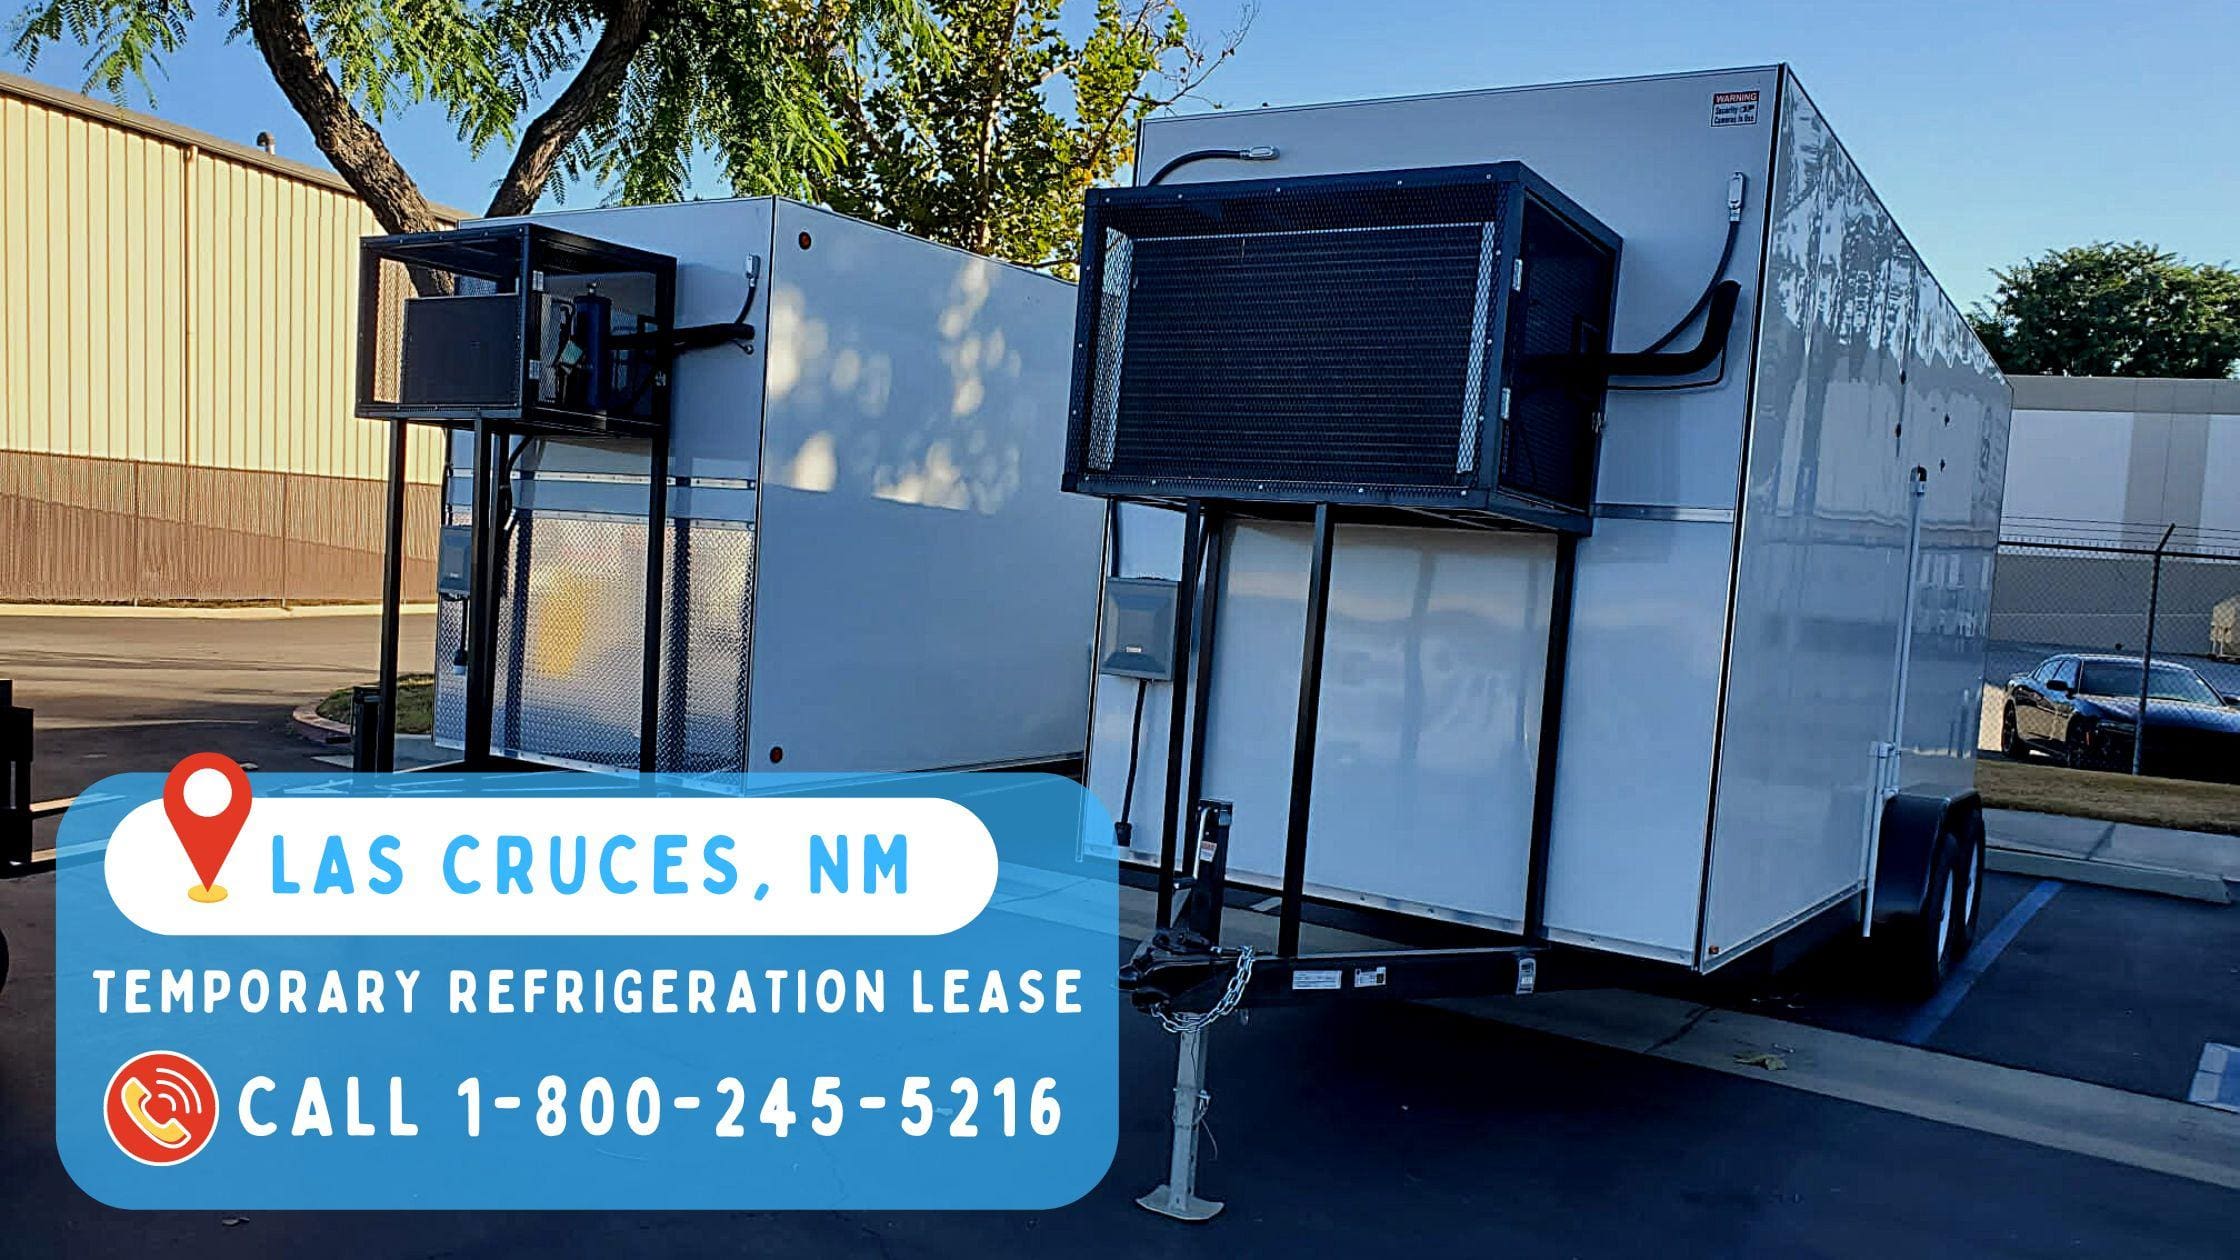 Temporary Refrigeration Lease in Las Cruces